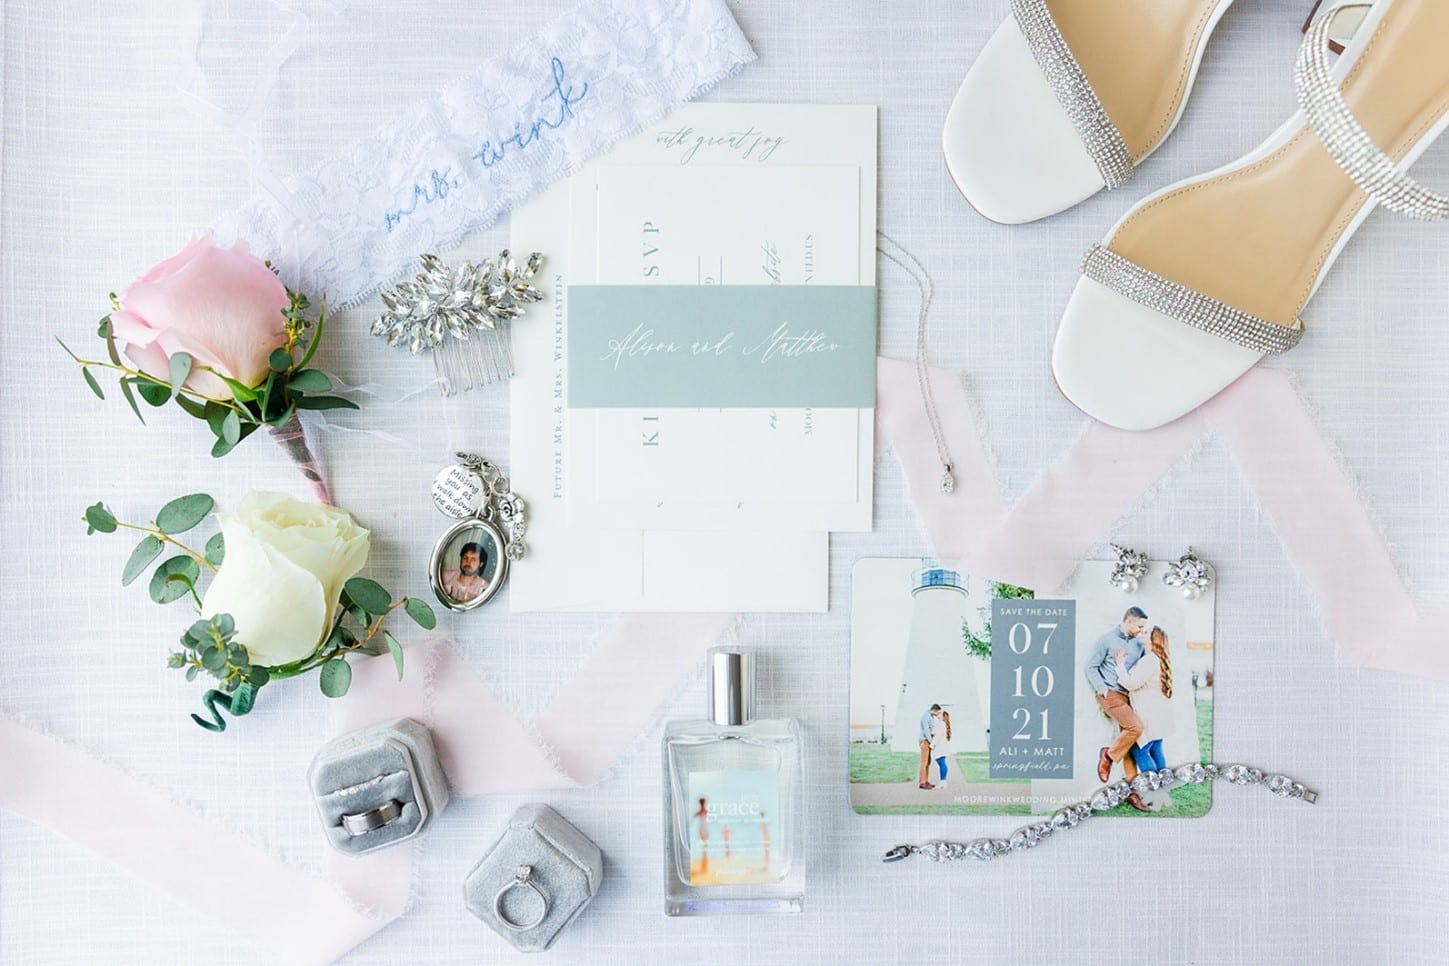 Engagement rings, planner, announcements, shoes, and flowers. Photographed by Chesapeake Charm Photography.